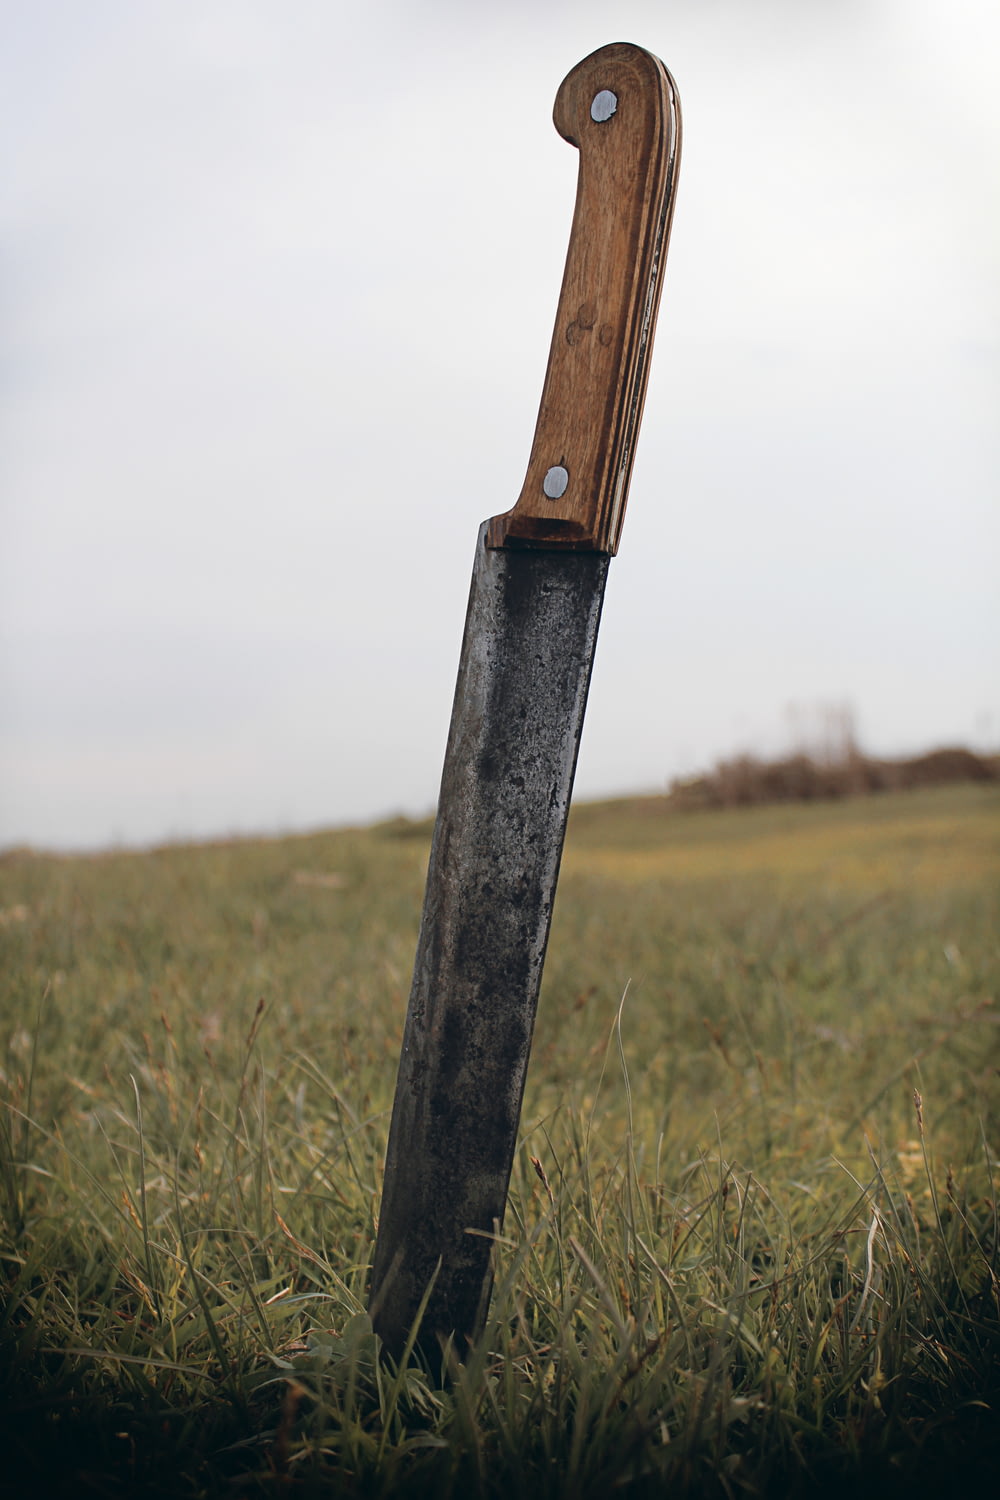 black handle knife on green grass field during daytime